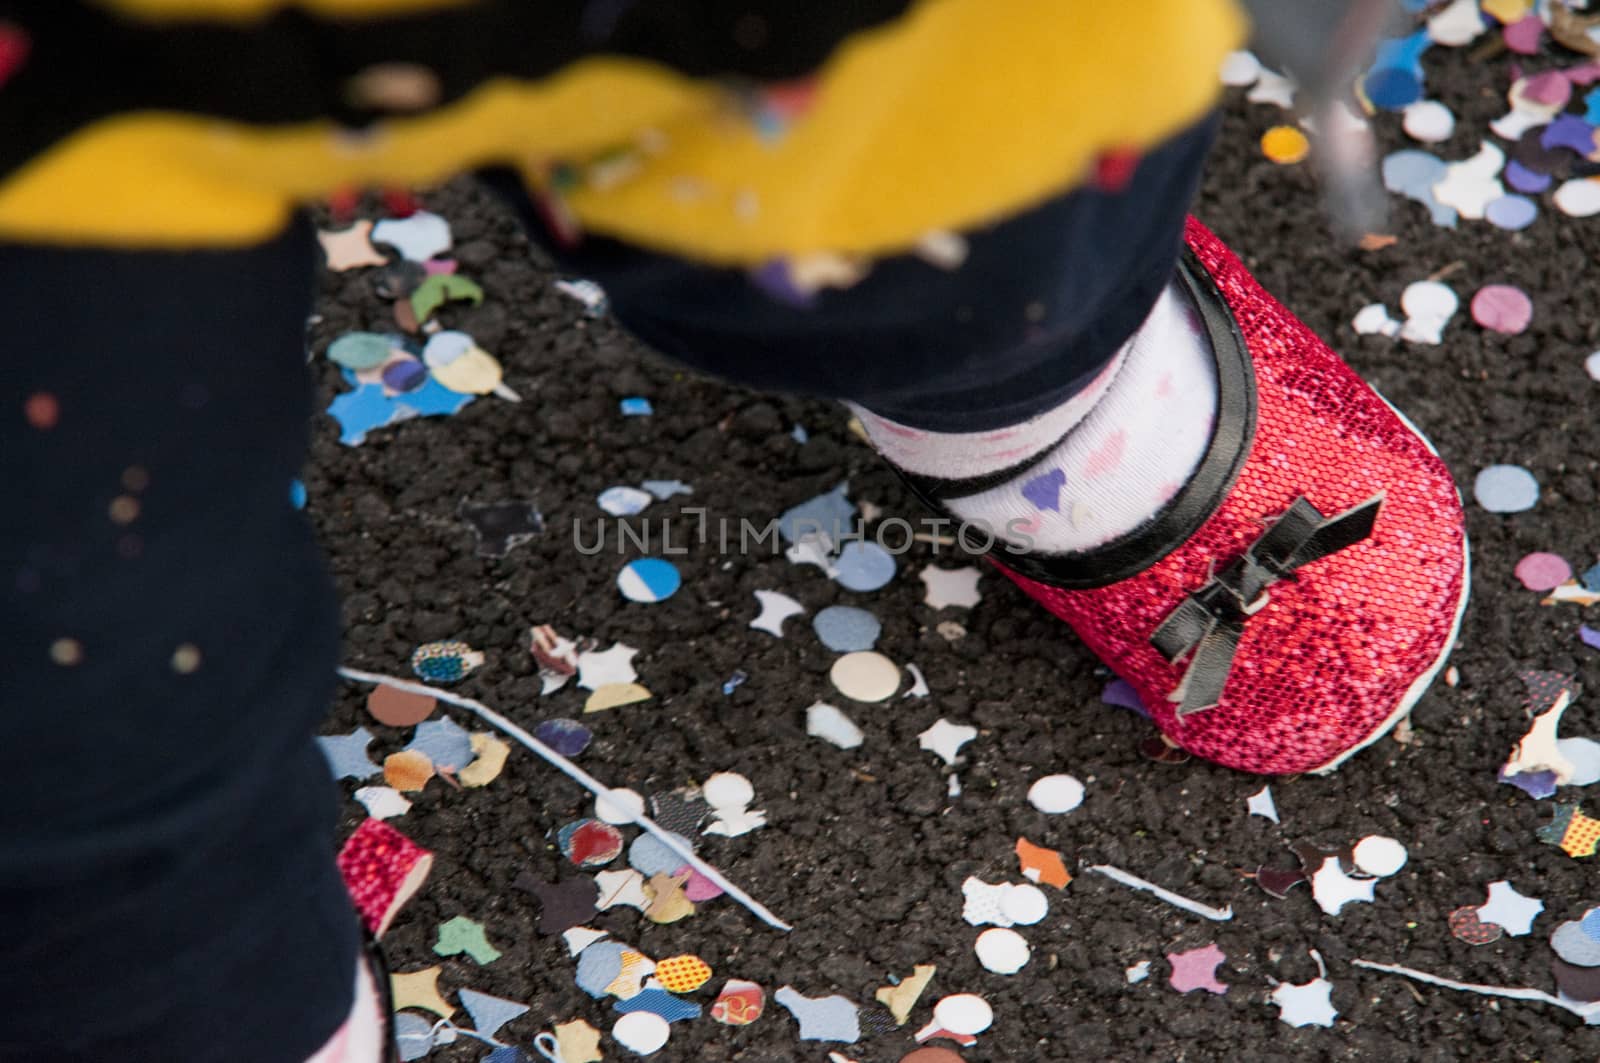 leg of a child with her shoe during the carnival with many confetti